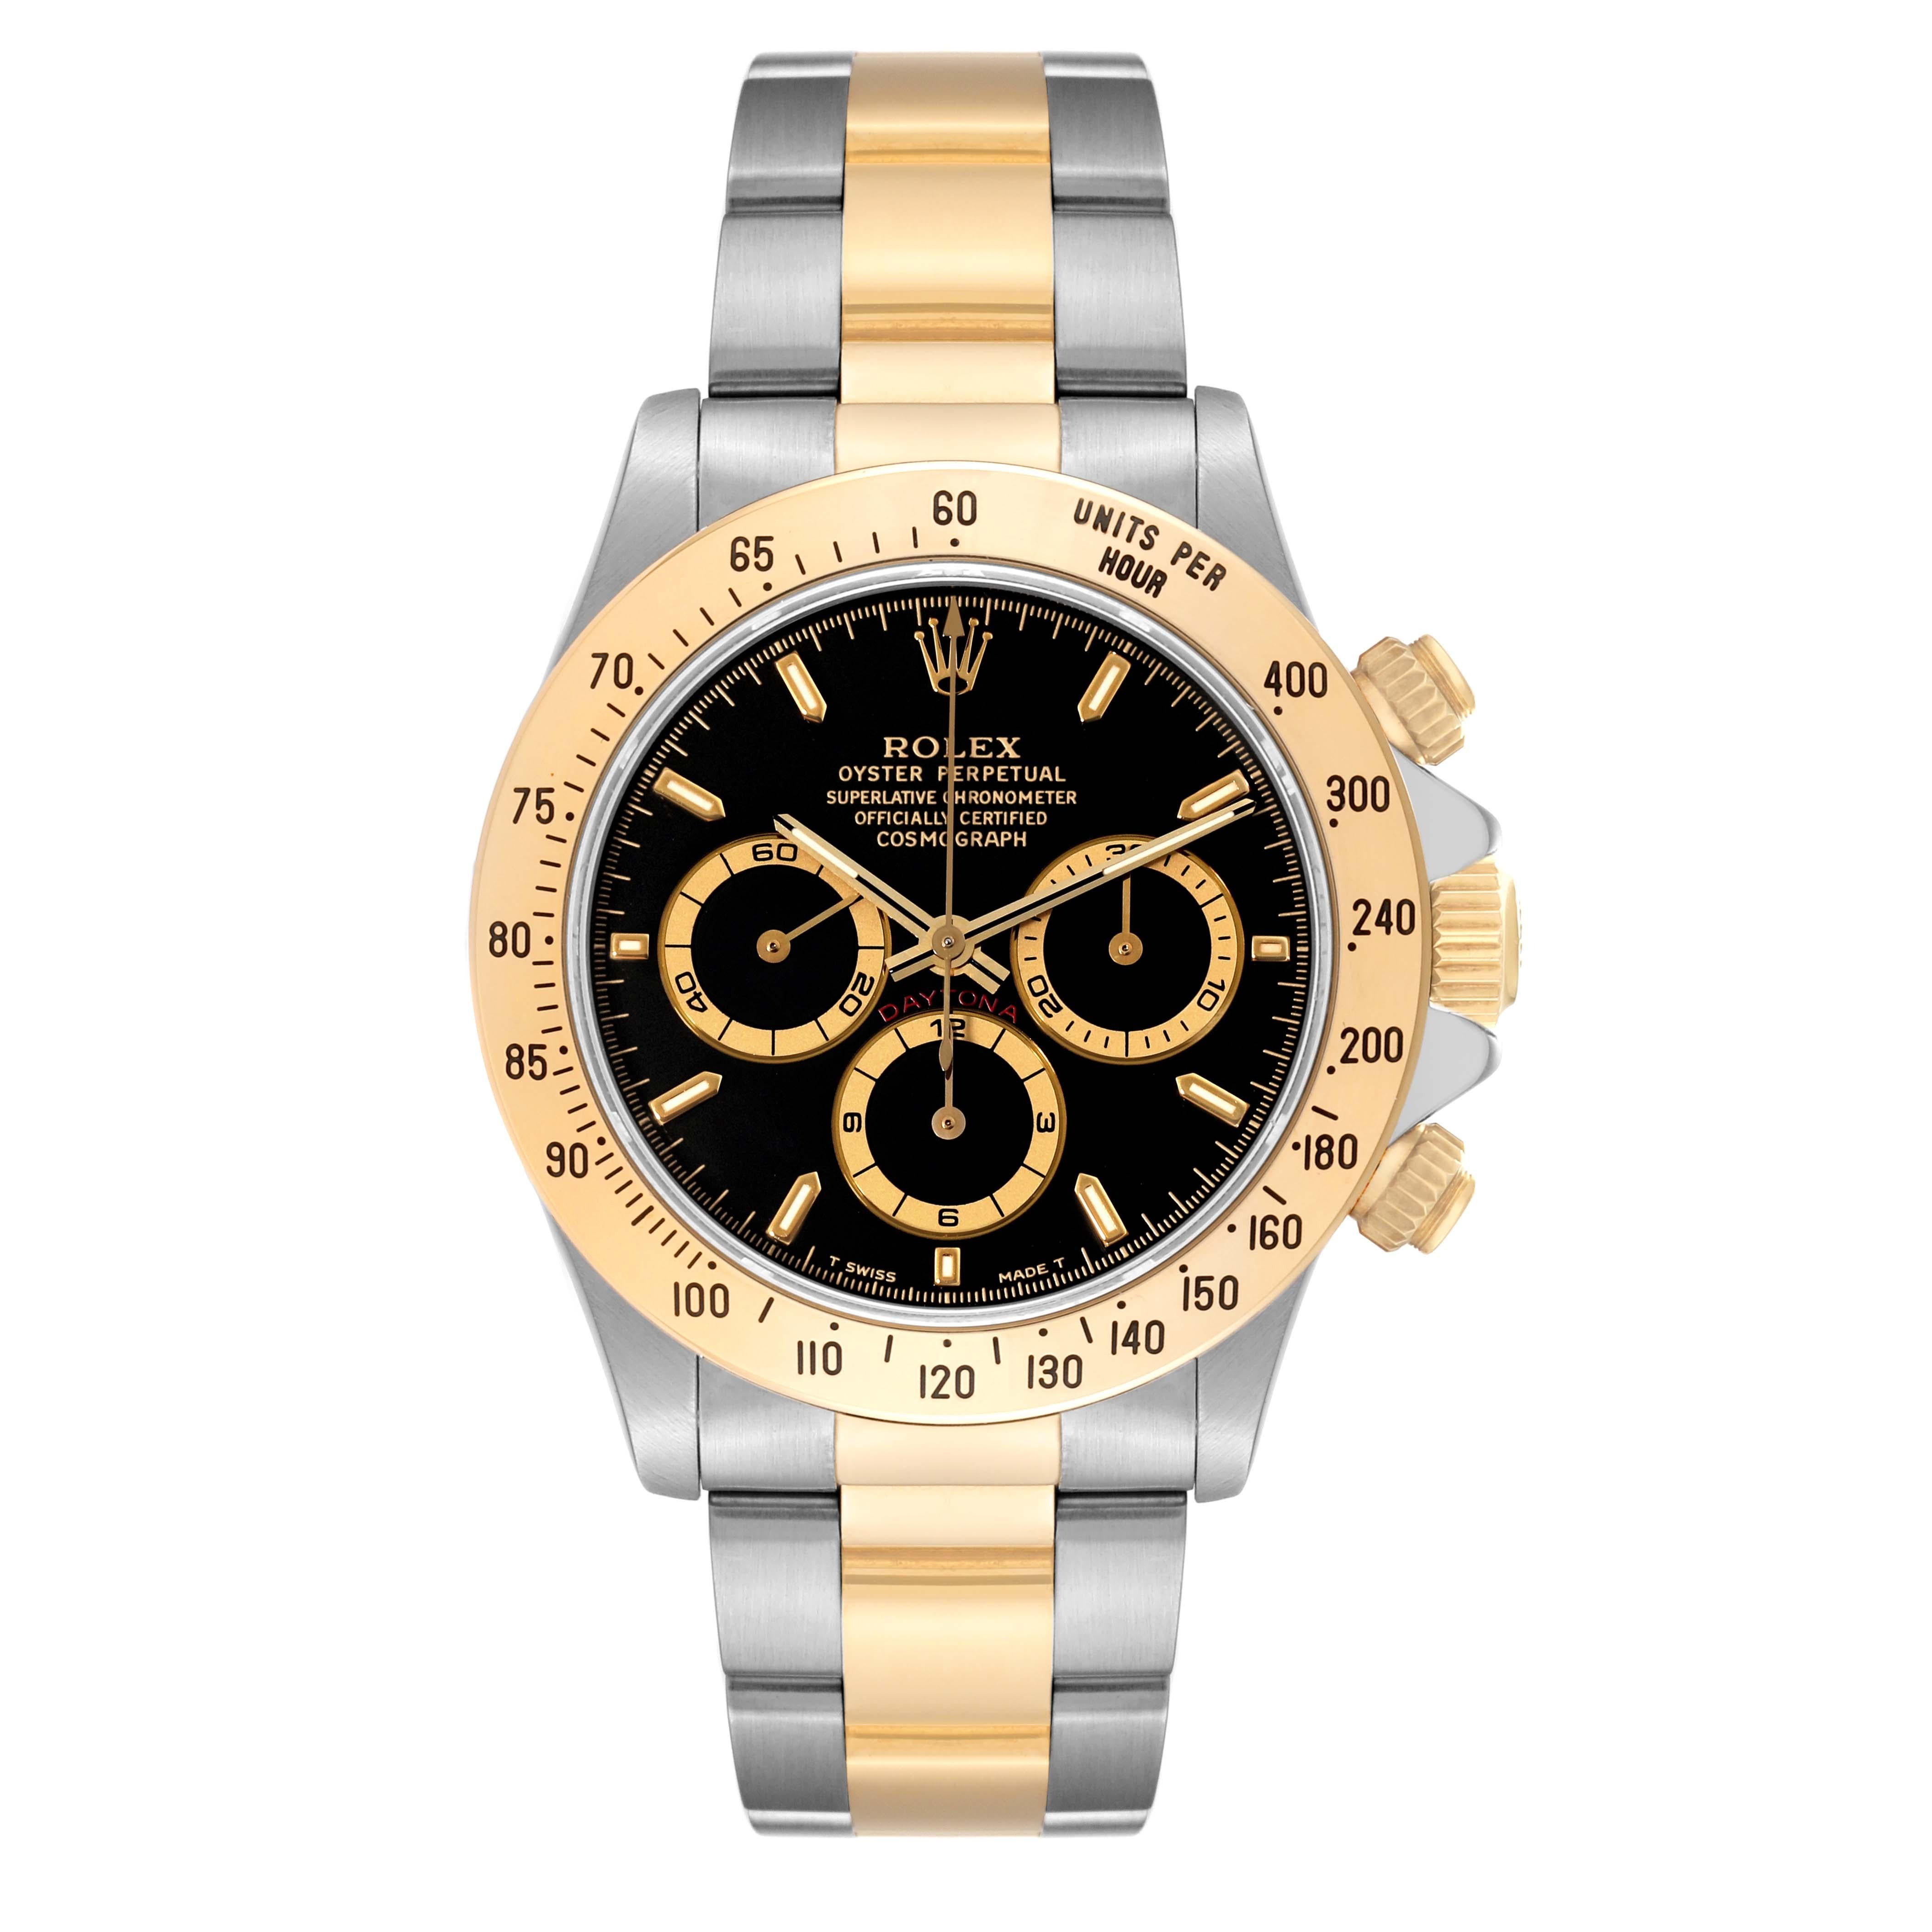 Rolex Daytona Steel Yellow Gold Zenith Movement Mens Watch 16523. Officially certified chronometer automatic self-winding movement. Zenith based chronograph. Stainless steel and 18K yellow gold case 40.0 mm in diameter. Special screw-down push